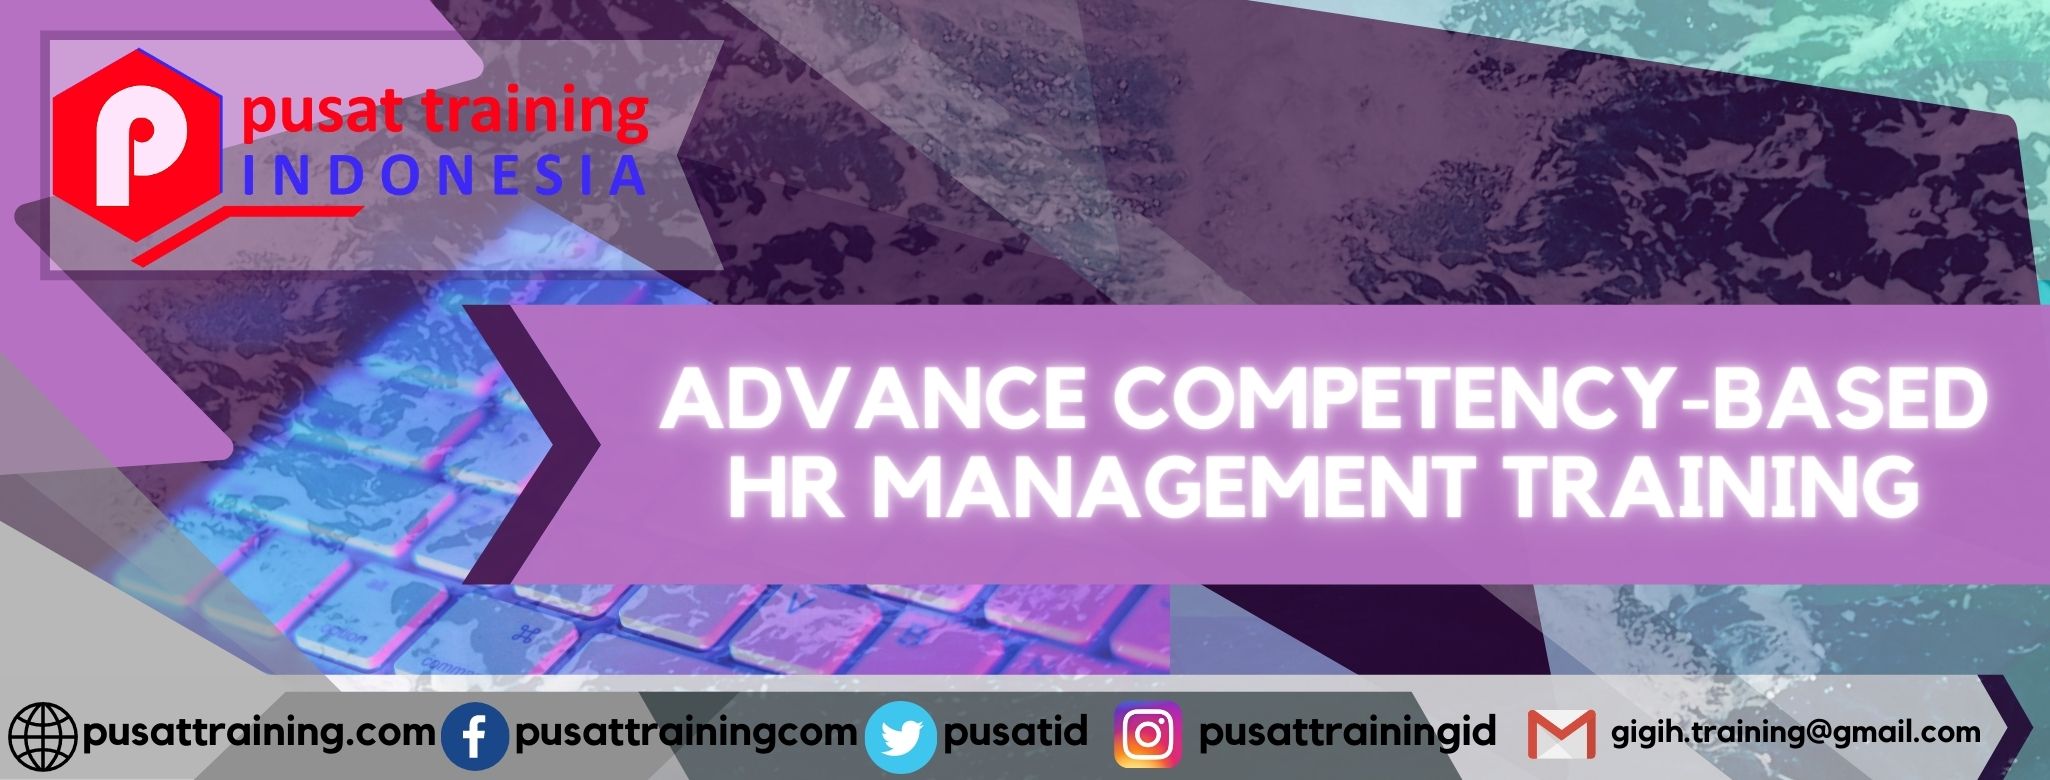 ADVANCE COMPETENCY-BASED HR MANAGEMENT TRAINING